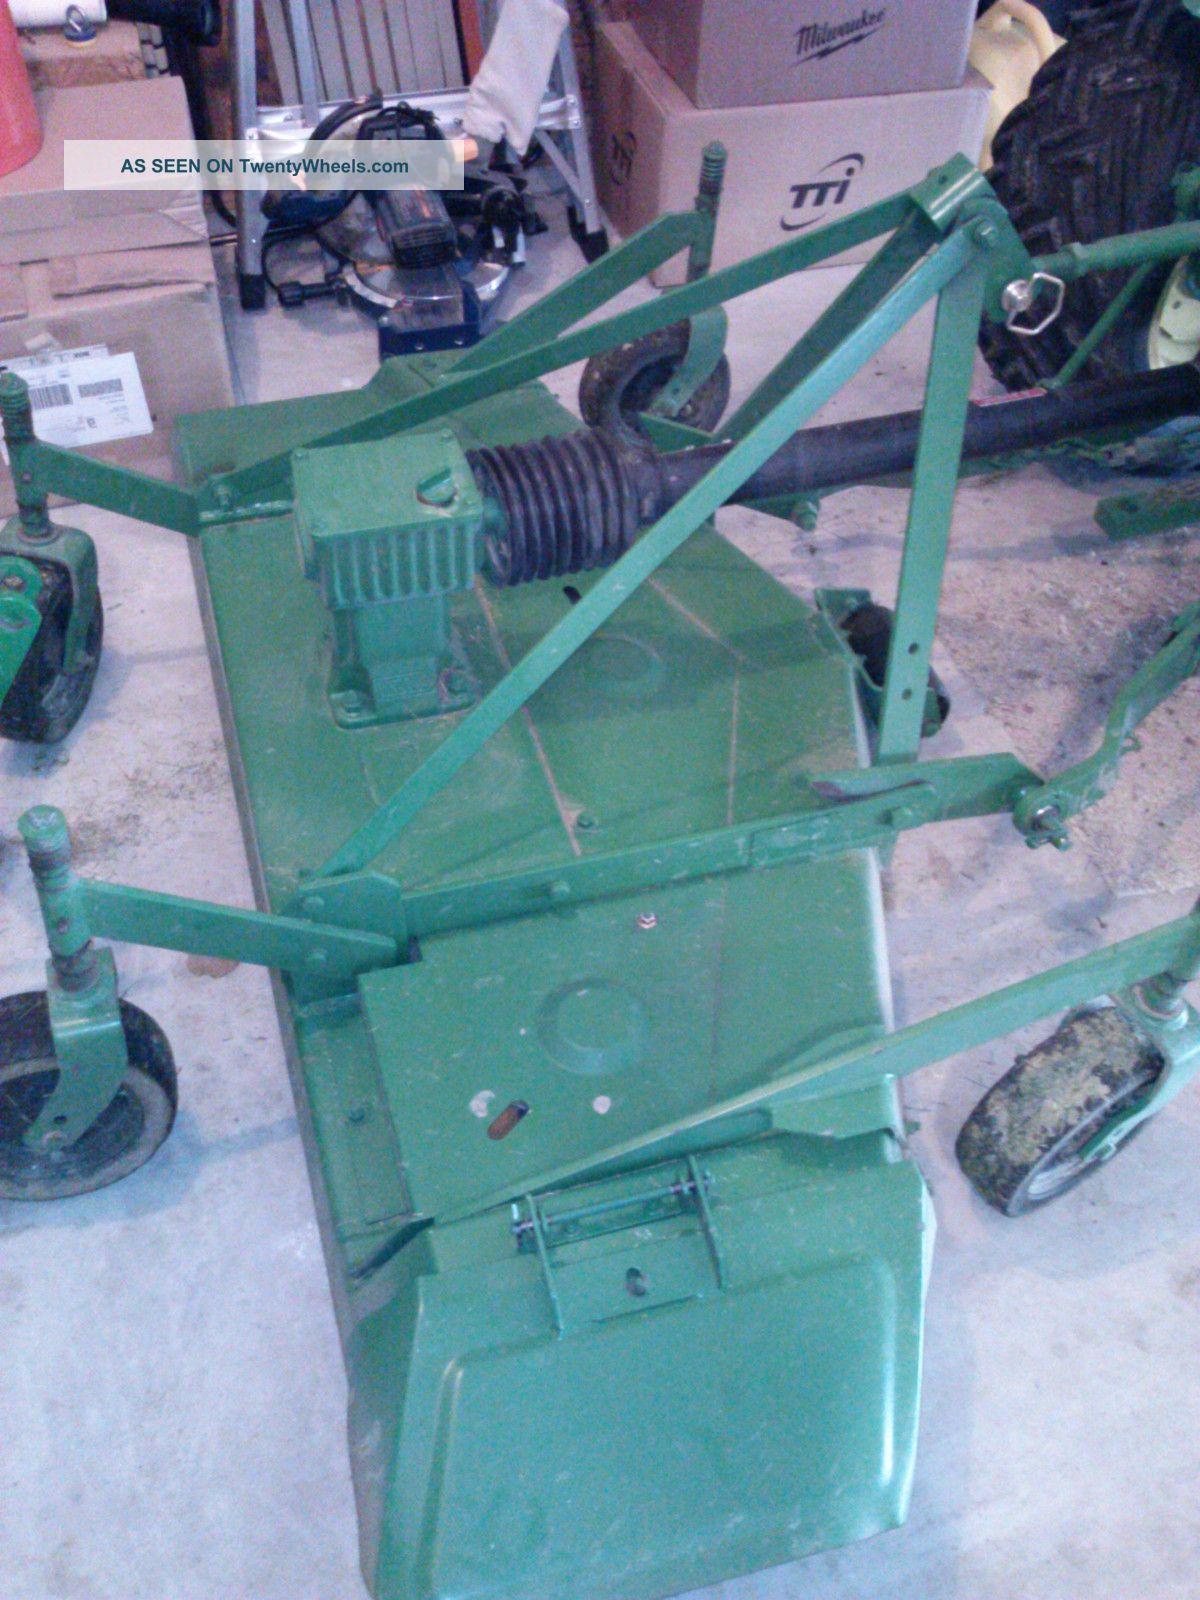 John Deere 650 Diesel Tractor With Attachments